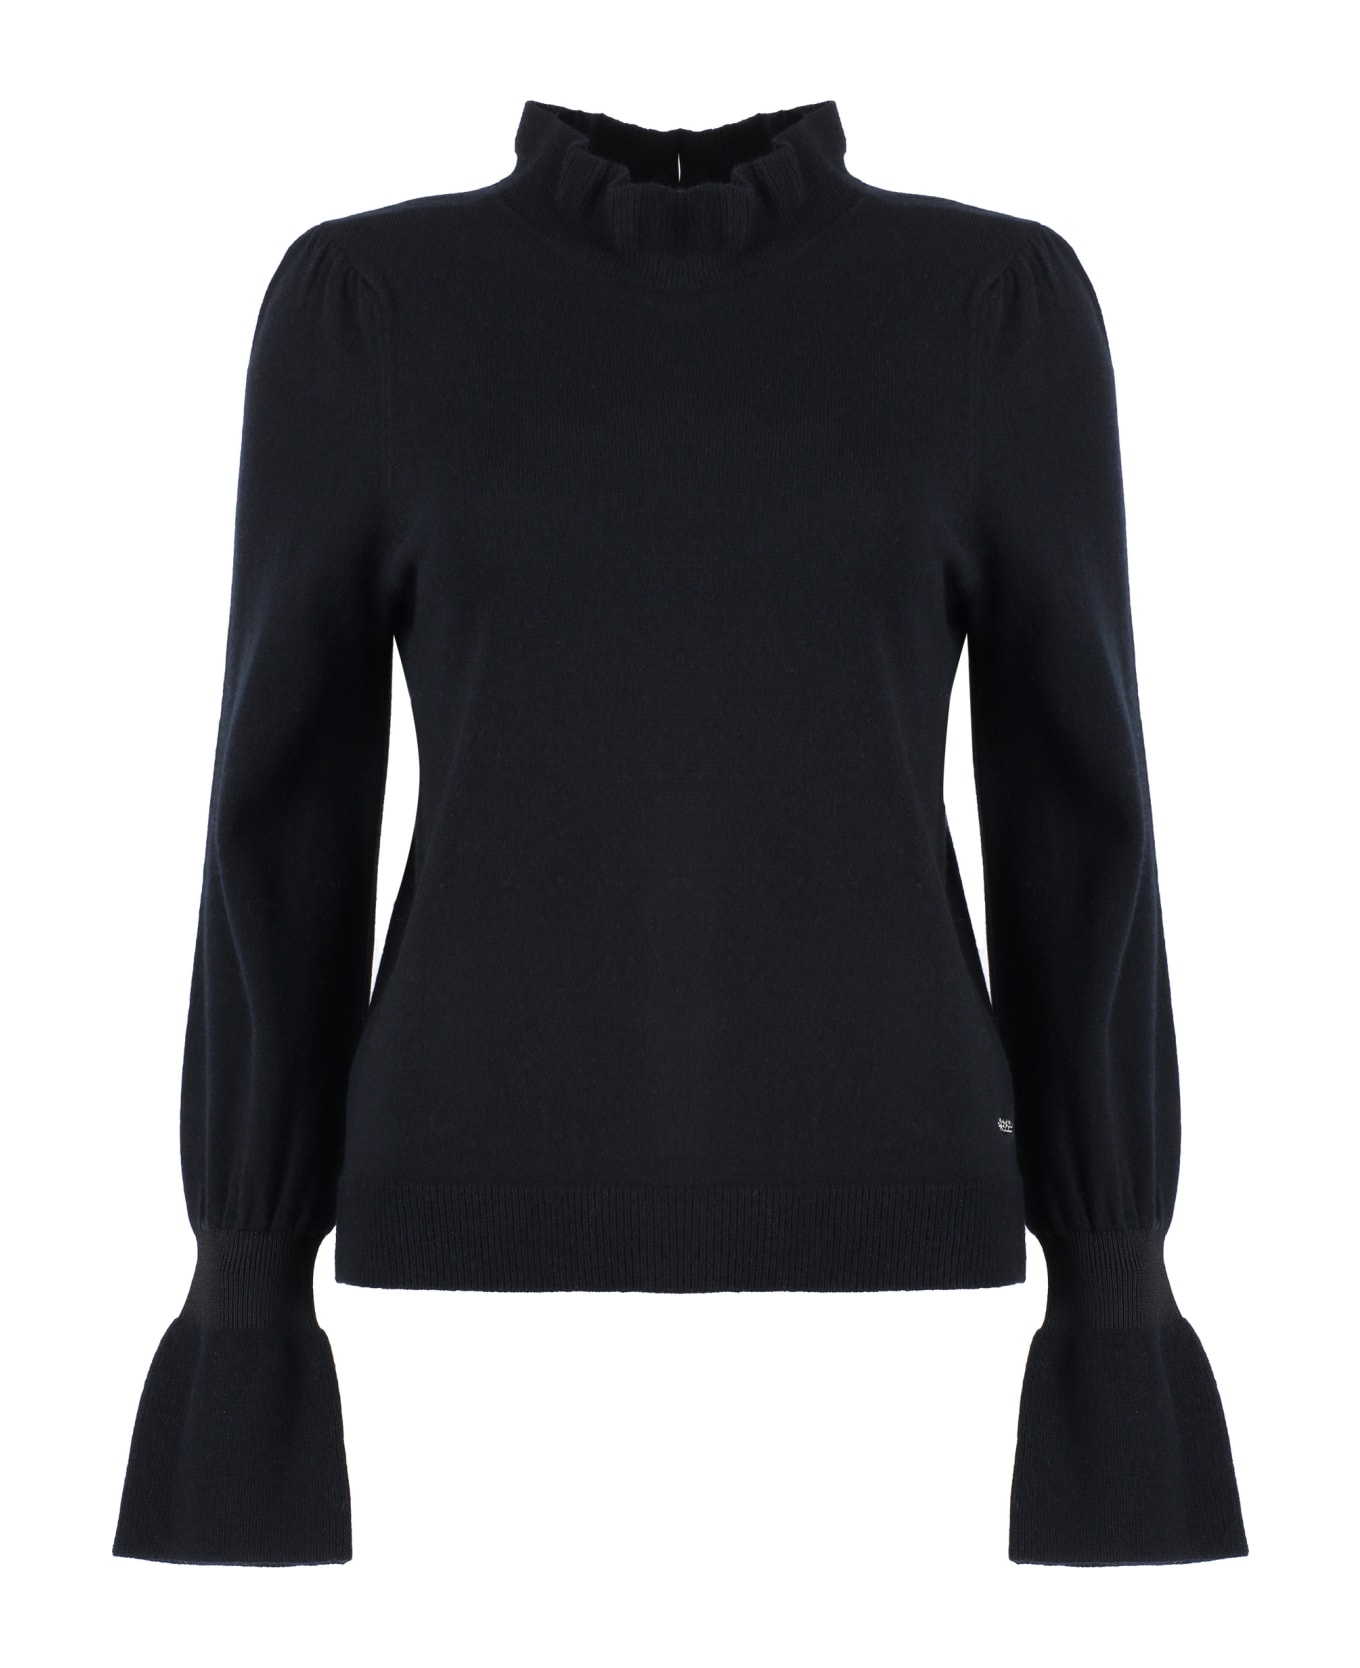 Hugo Boss Ribbed Cashmere And Wool Sweater - black